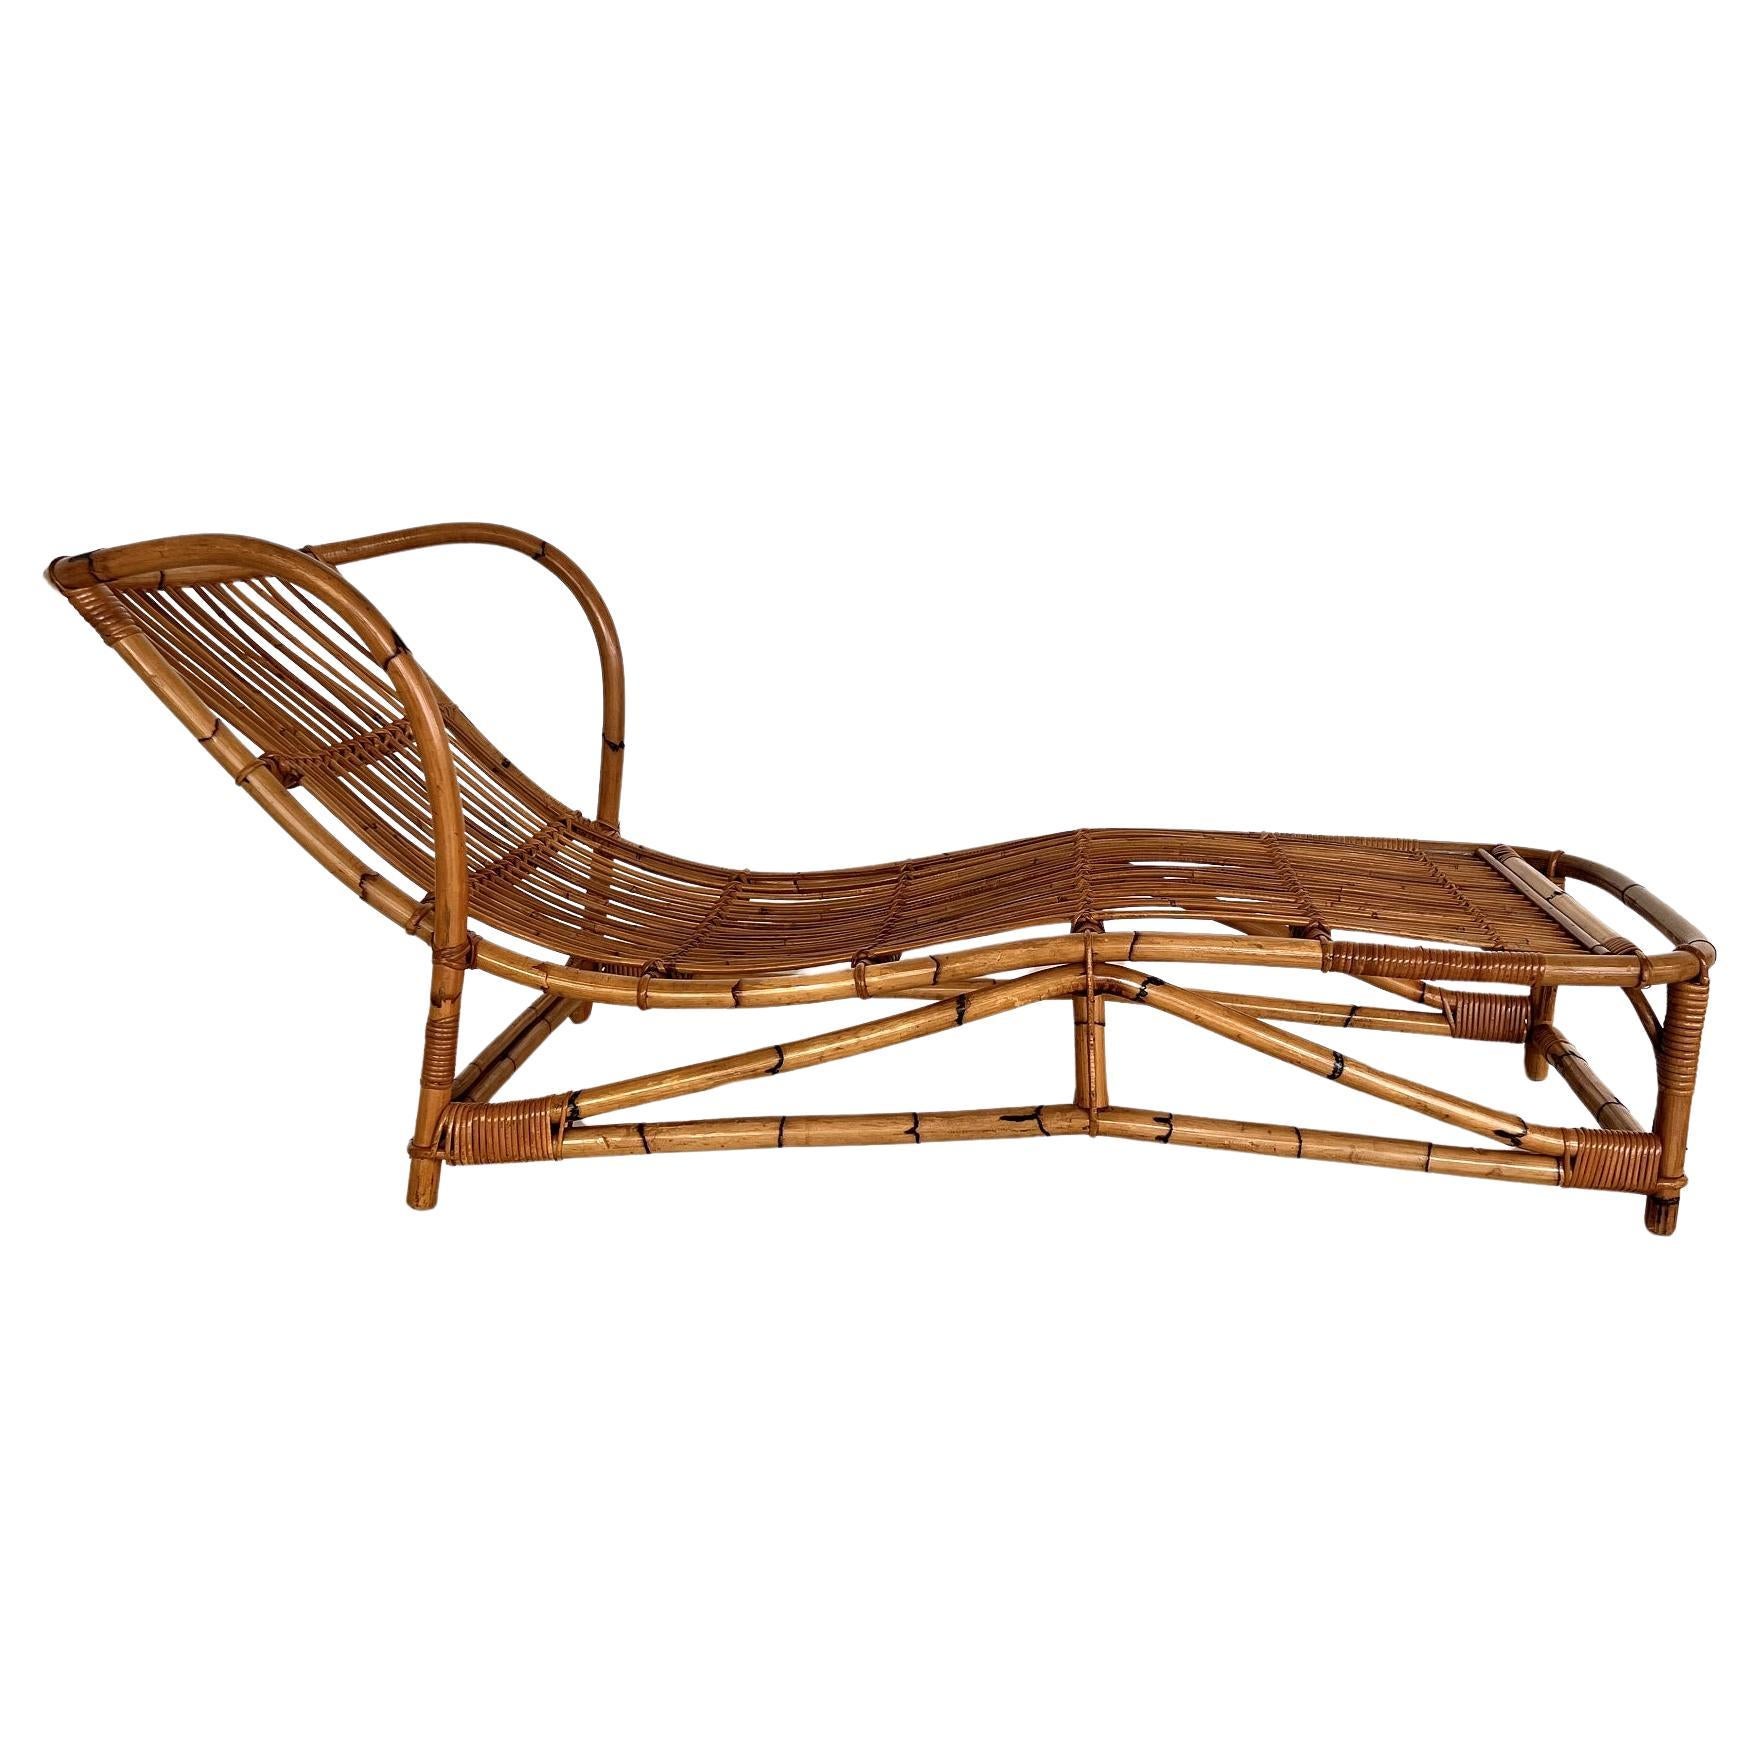 Italian Midcentury Organic Bamboo Daybed or Sunbed For Sale